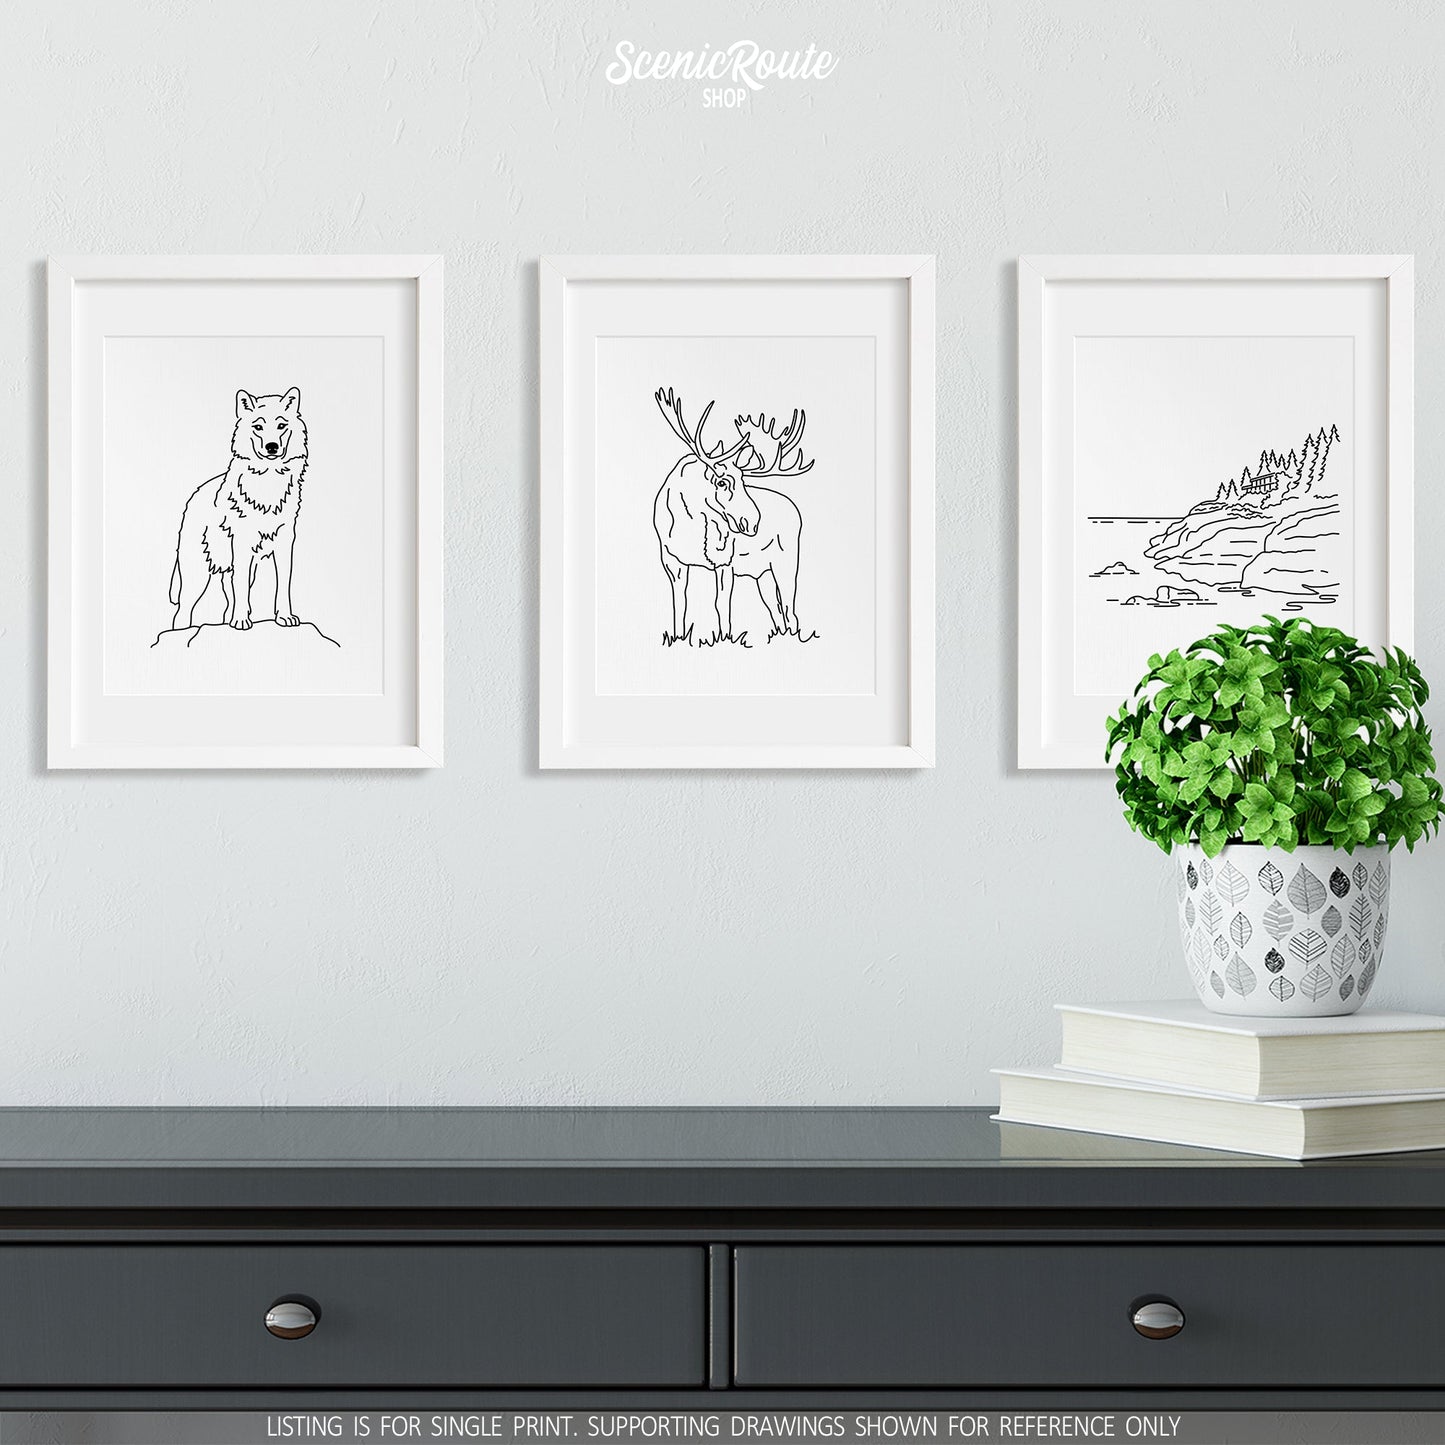 A group of three framed drawings on a wall above a dresser with books and a plant. The line art drawings include a Wolf, Moose, and Isle Royale National Park